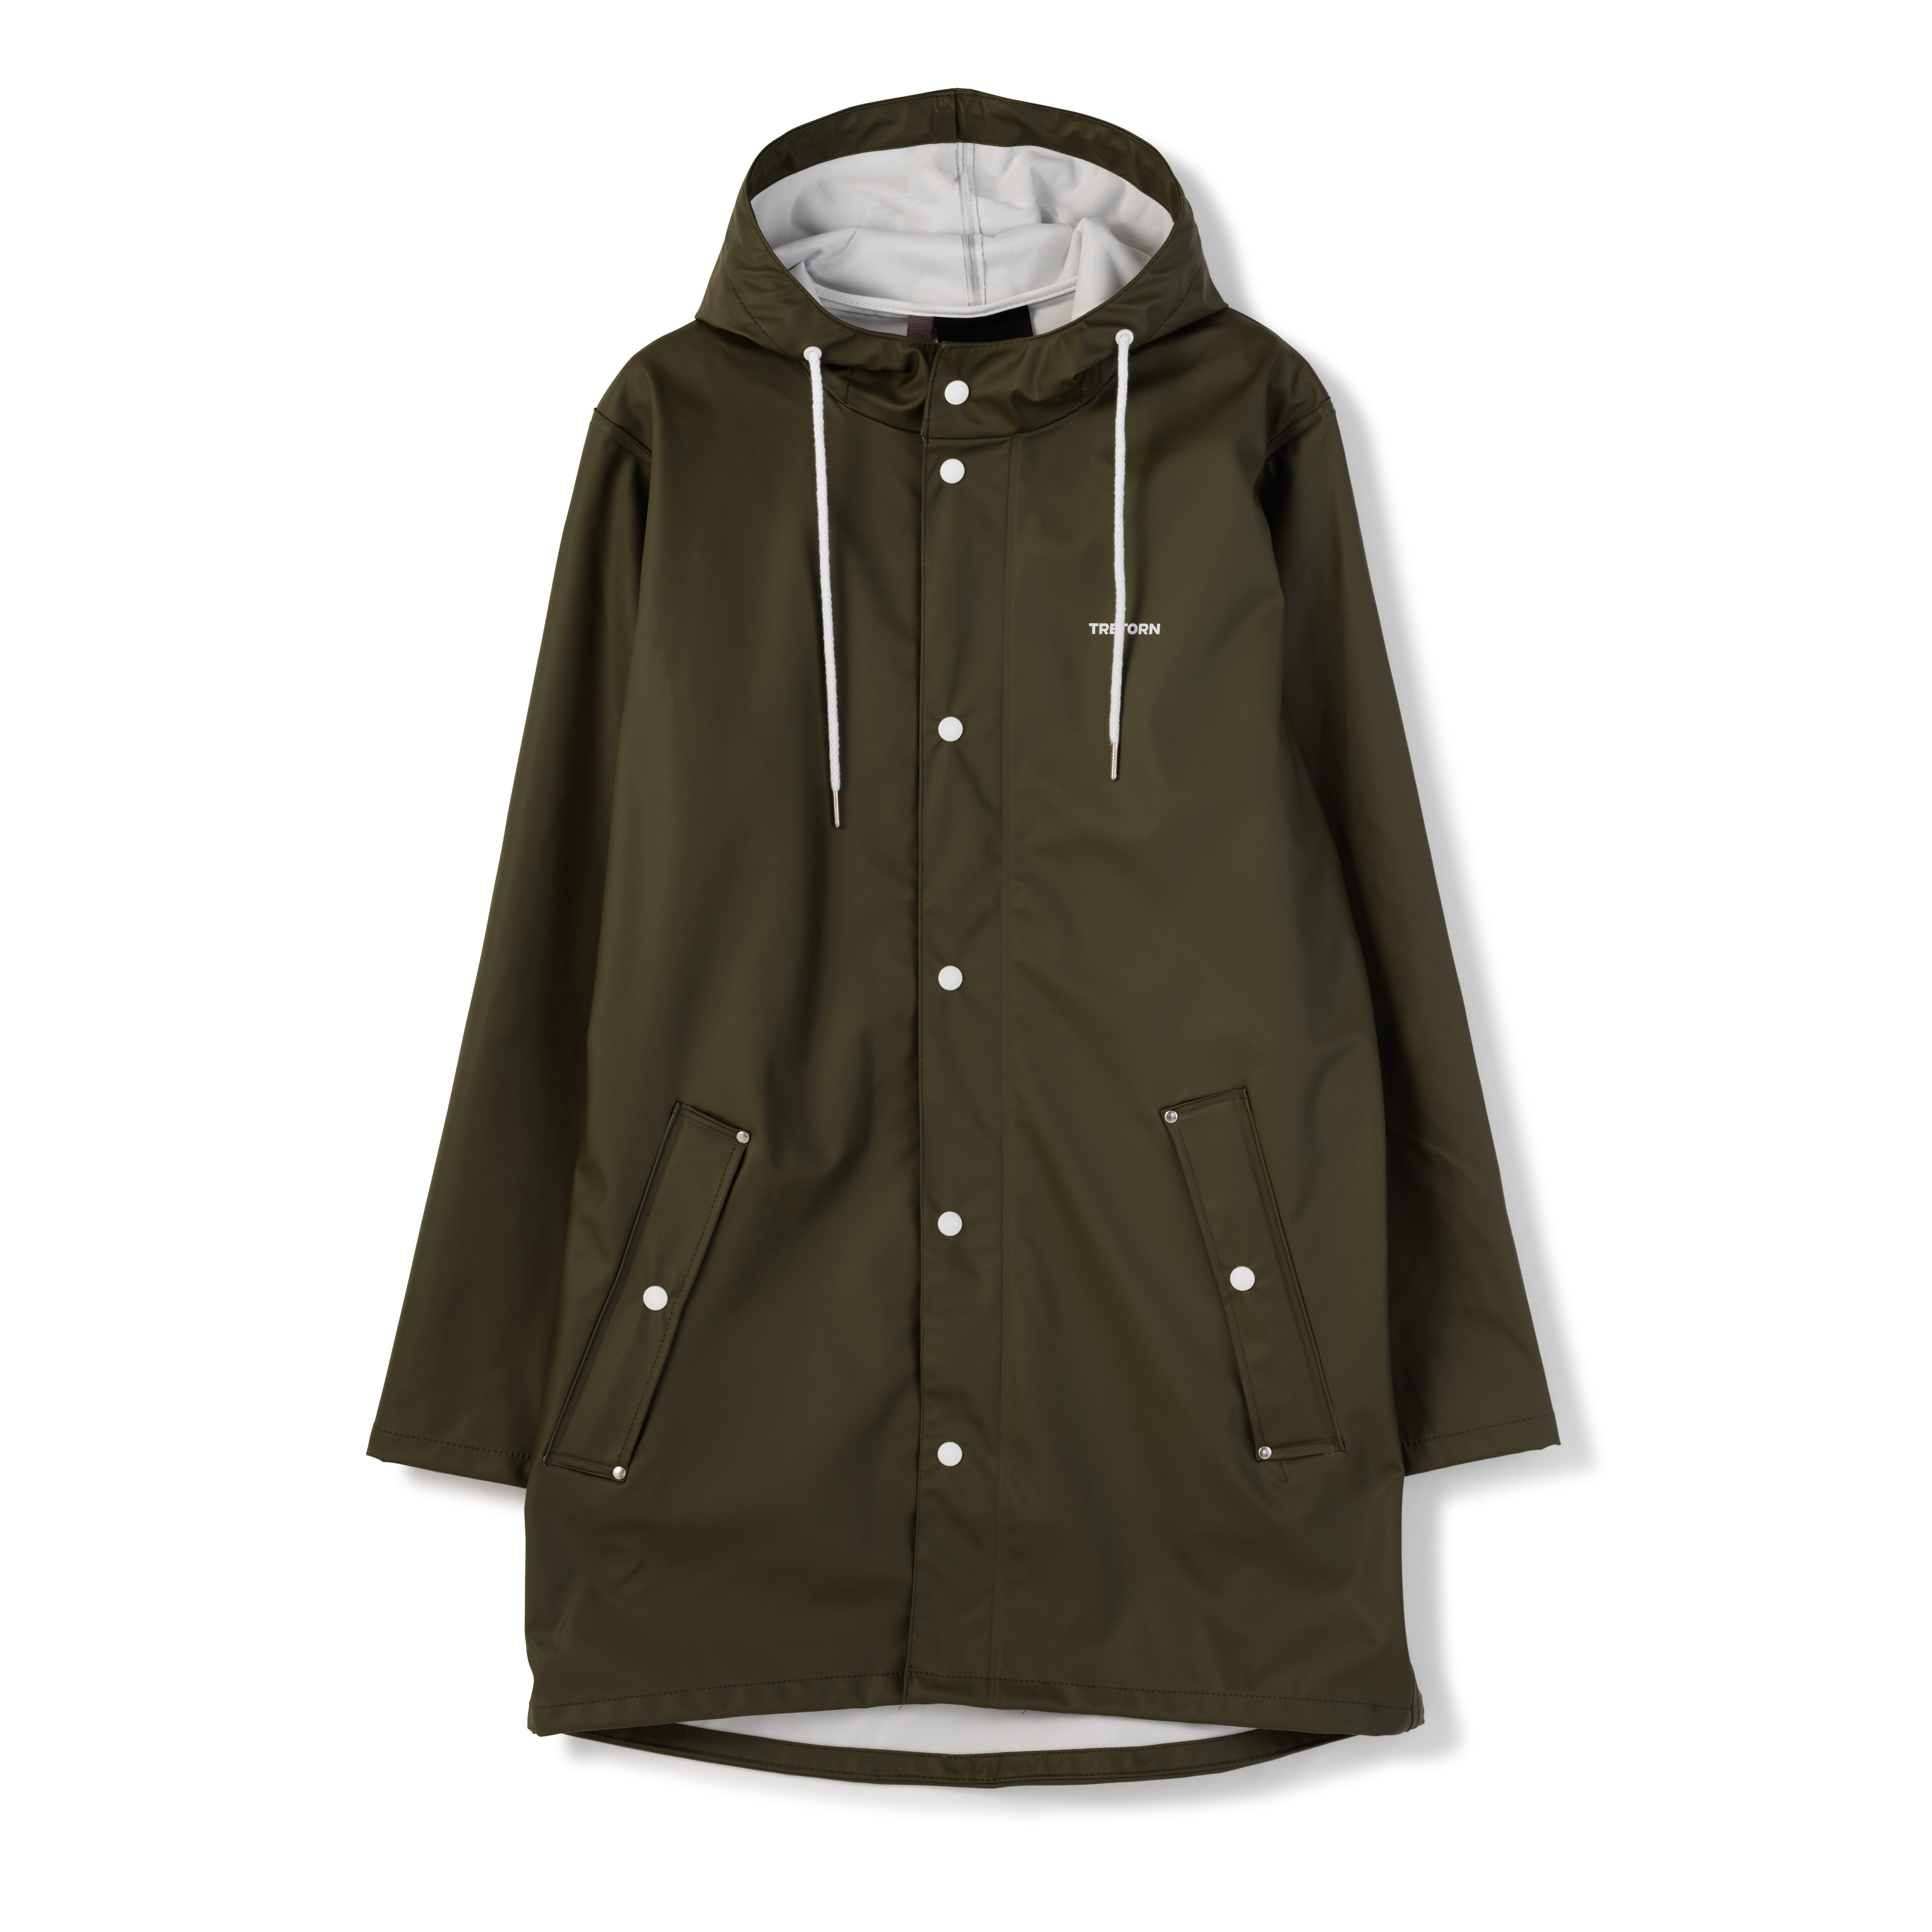 Wings rain jacket by Tretorn for men and women in the colour Dark Green